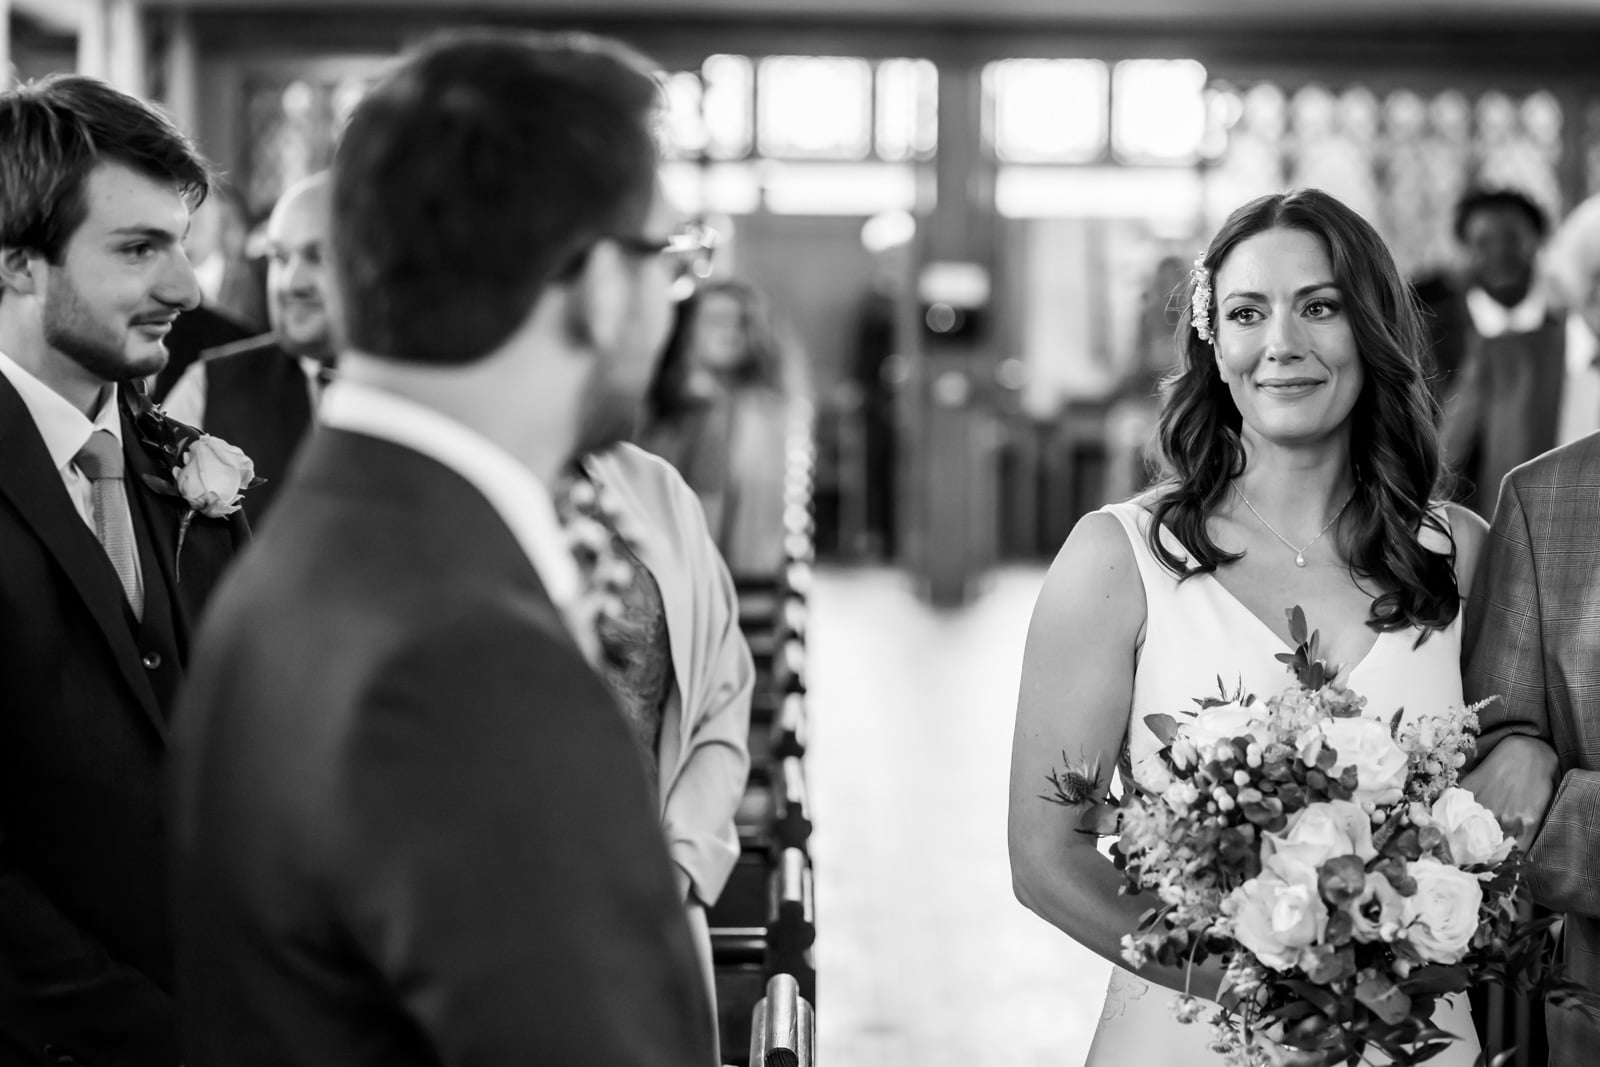 A teary moment as the bride walks towards her husband-to-be